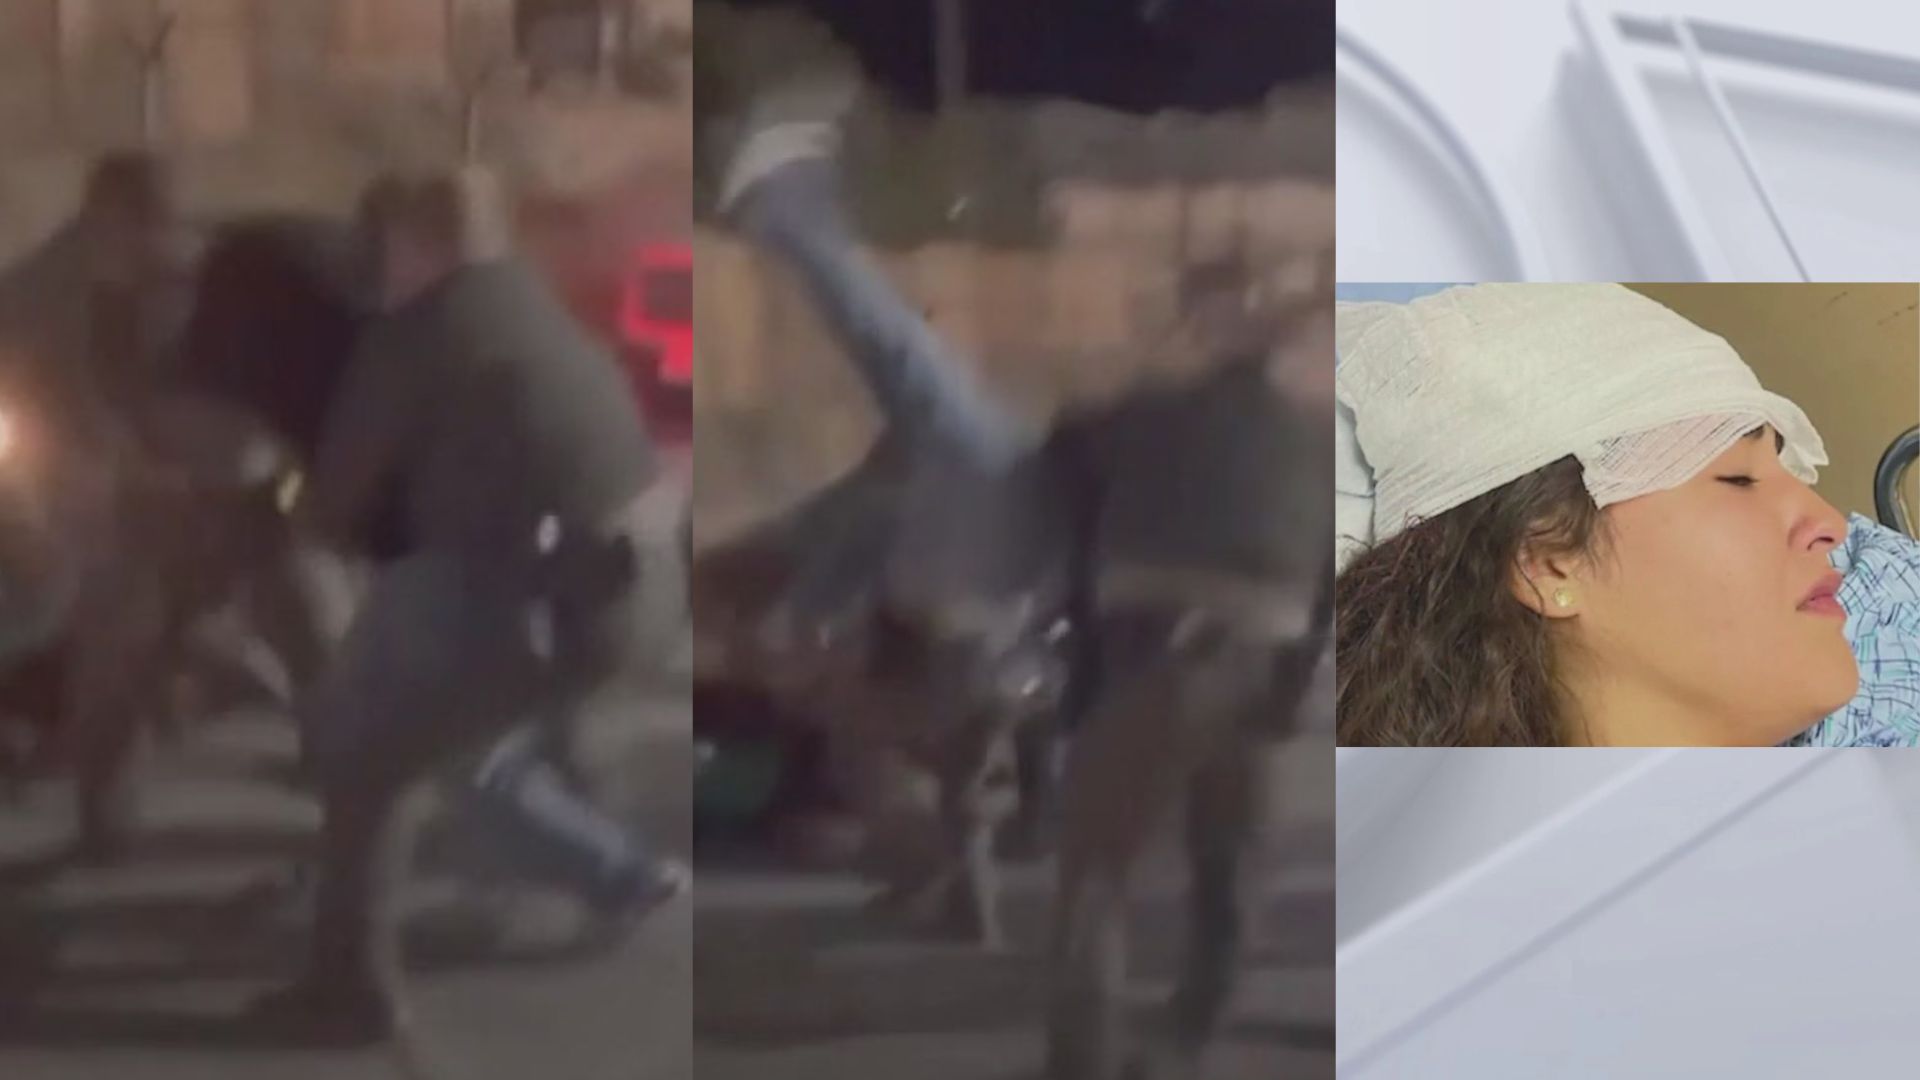 California teen girl slammed to ground by cop